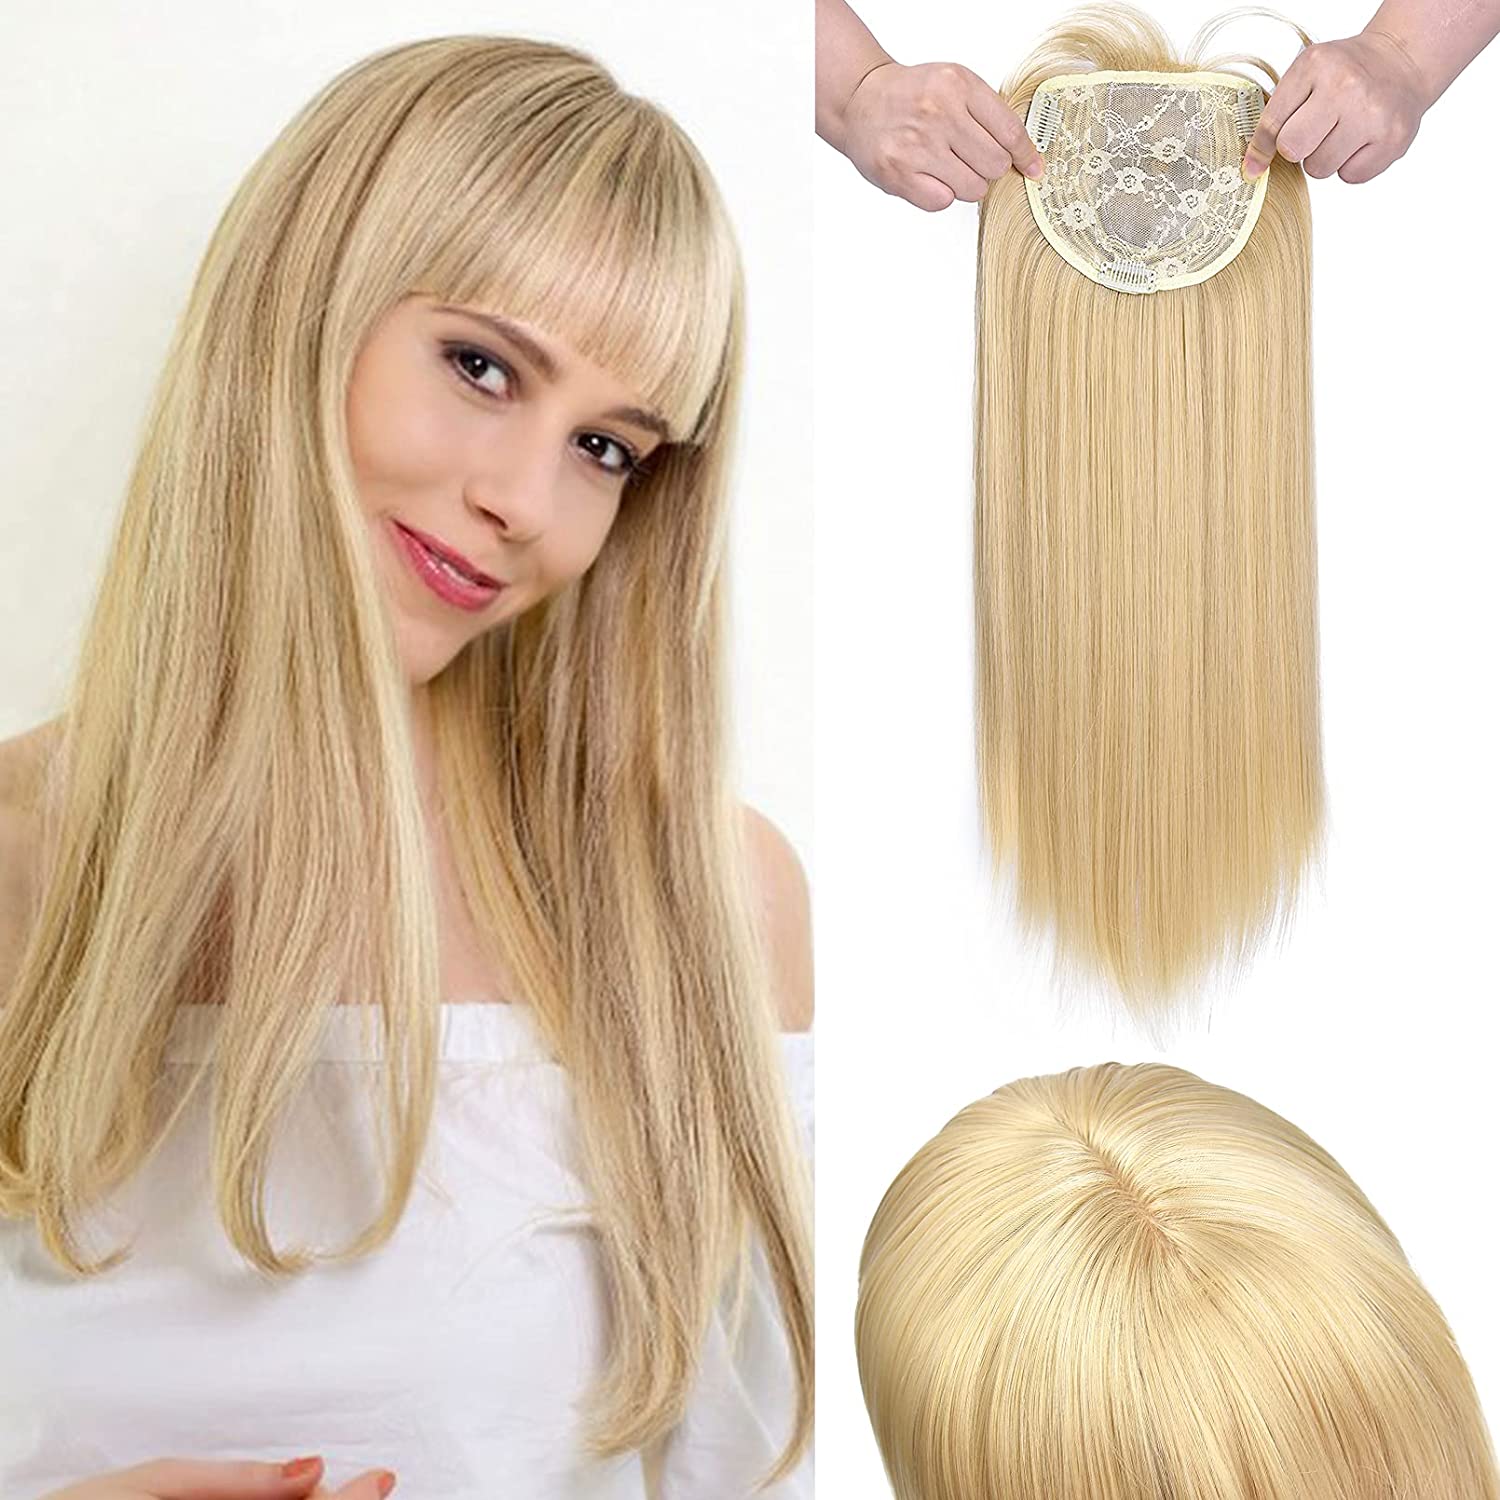 REECHO Hair Topper, Wiglets Hairpieces for Women with Thinning Hair 3 Clips in Straight Hair Extensions Enhancer